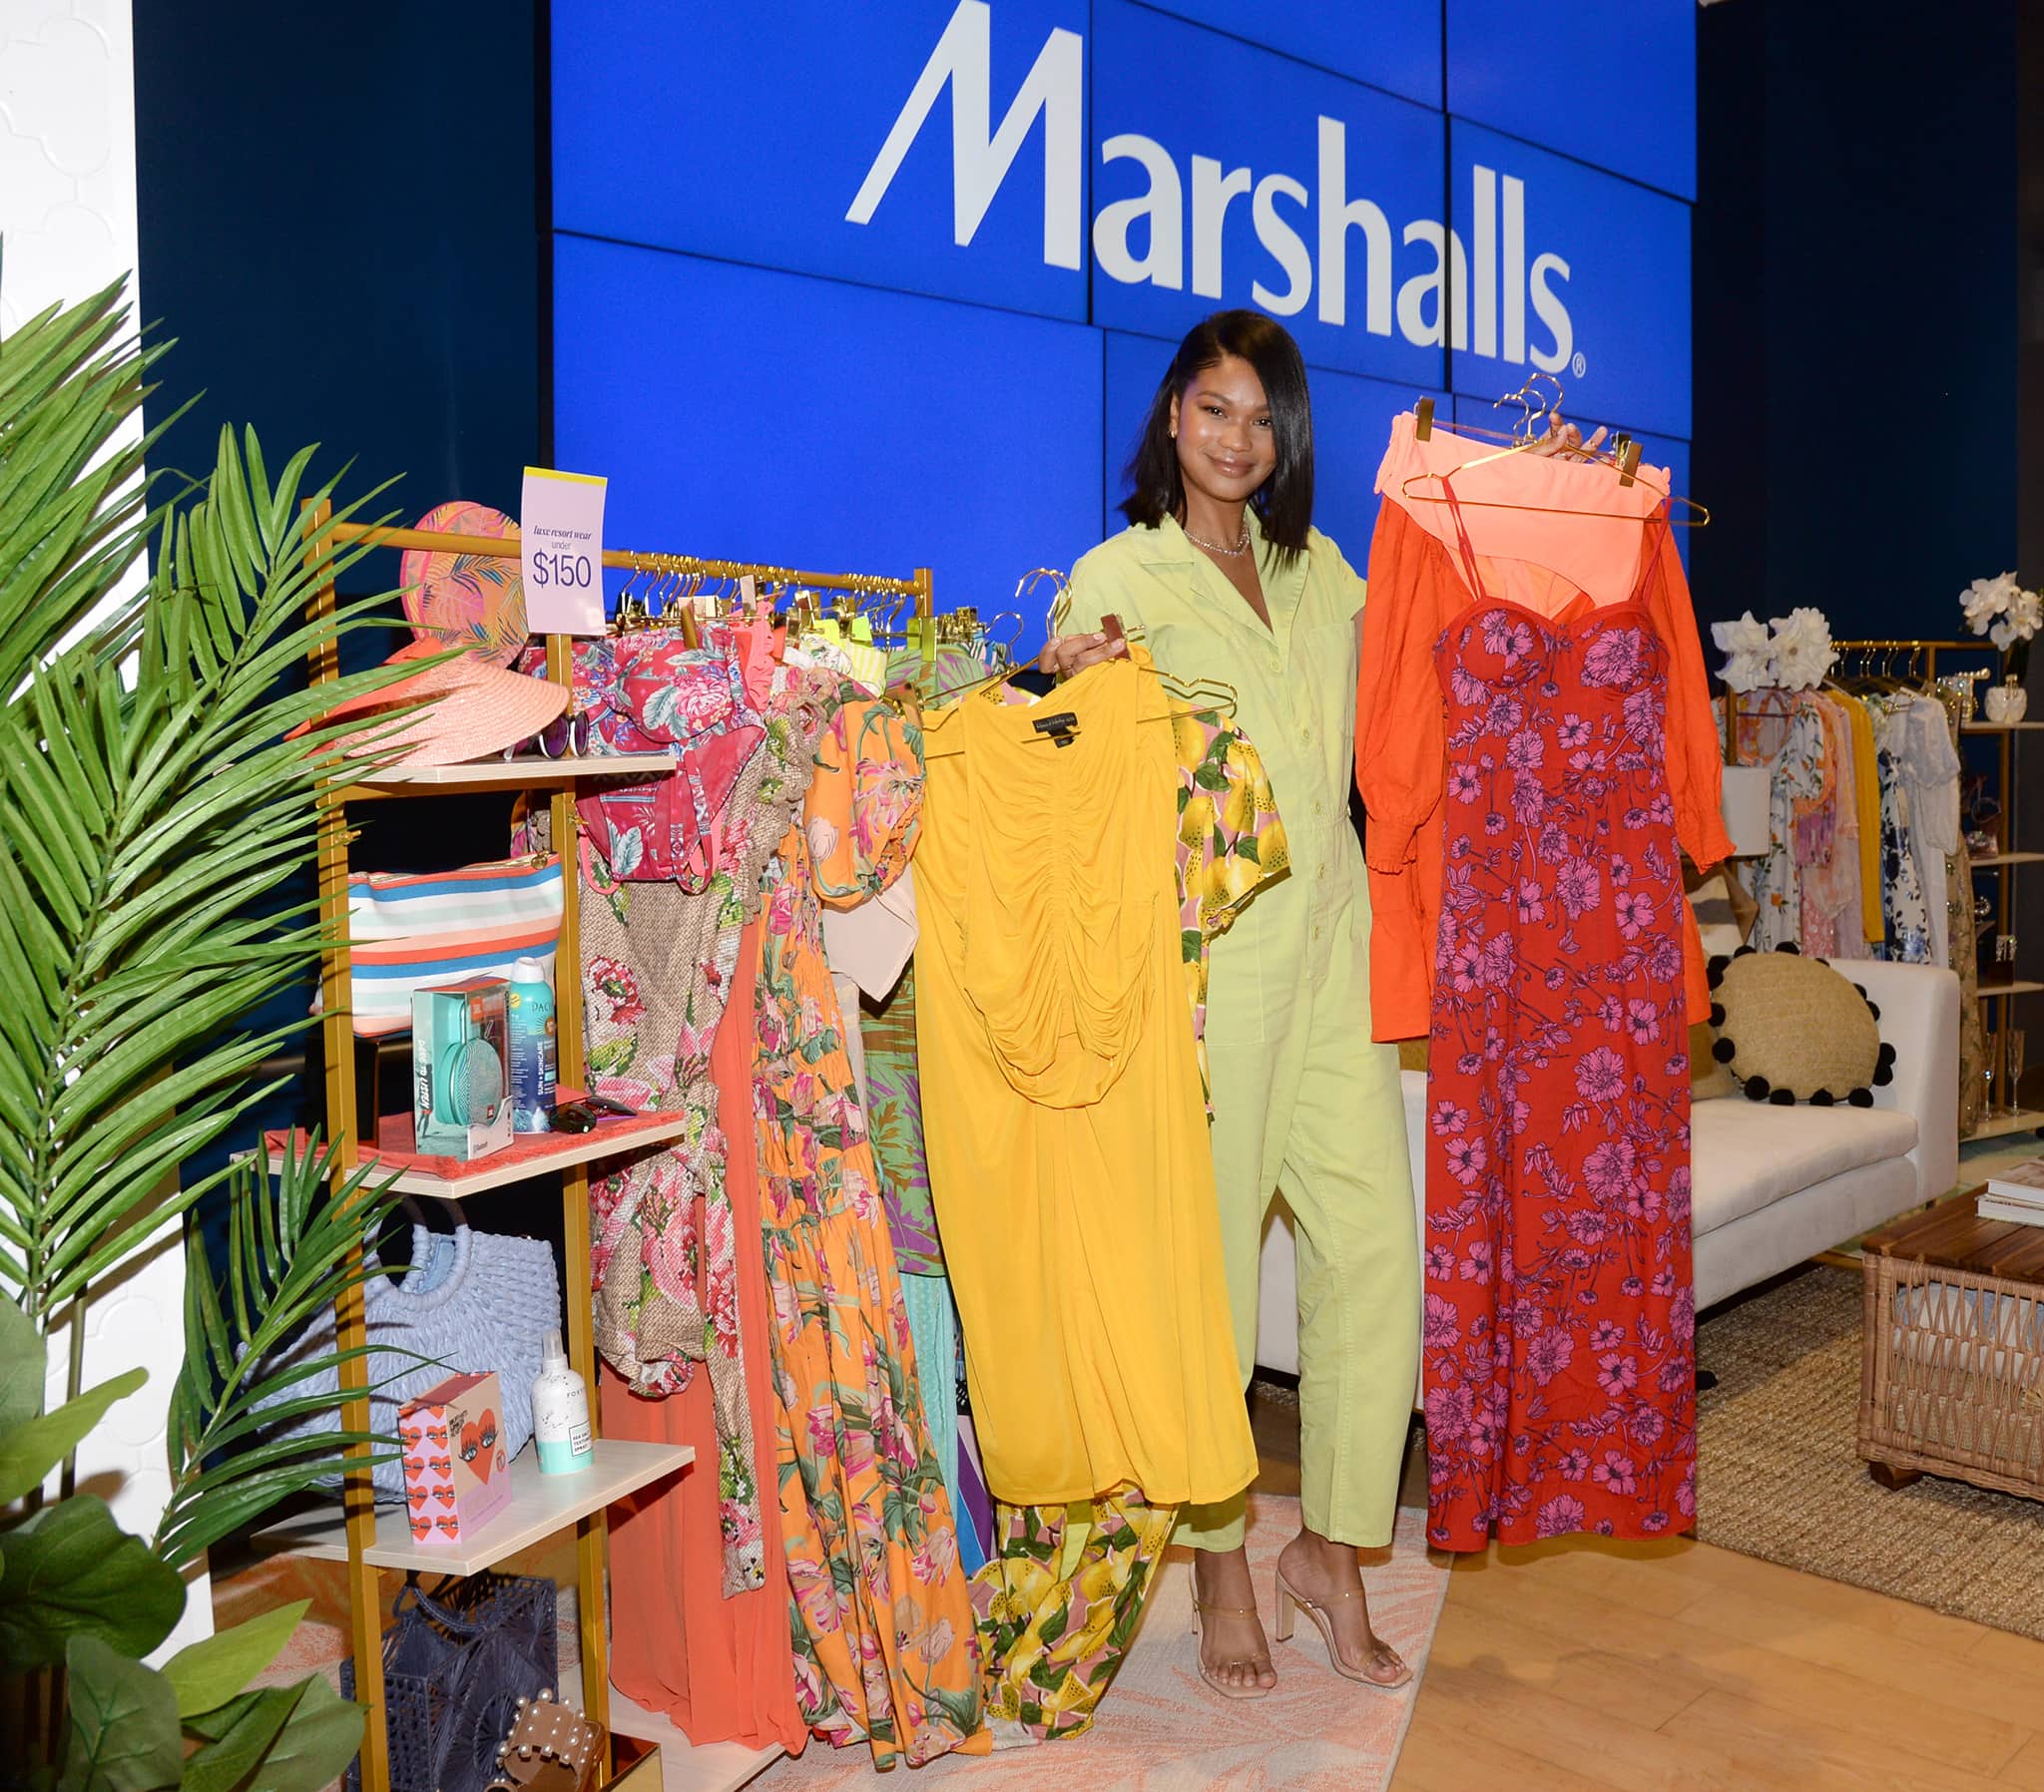 Chanel Iman teams up with Marshalls to give one lucky person the chance to make Marshalls her own closet for the summer